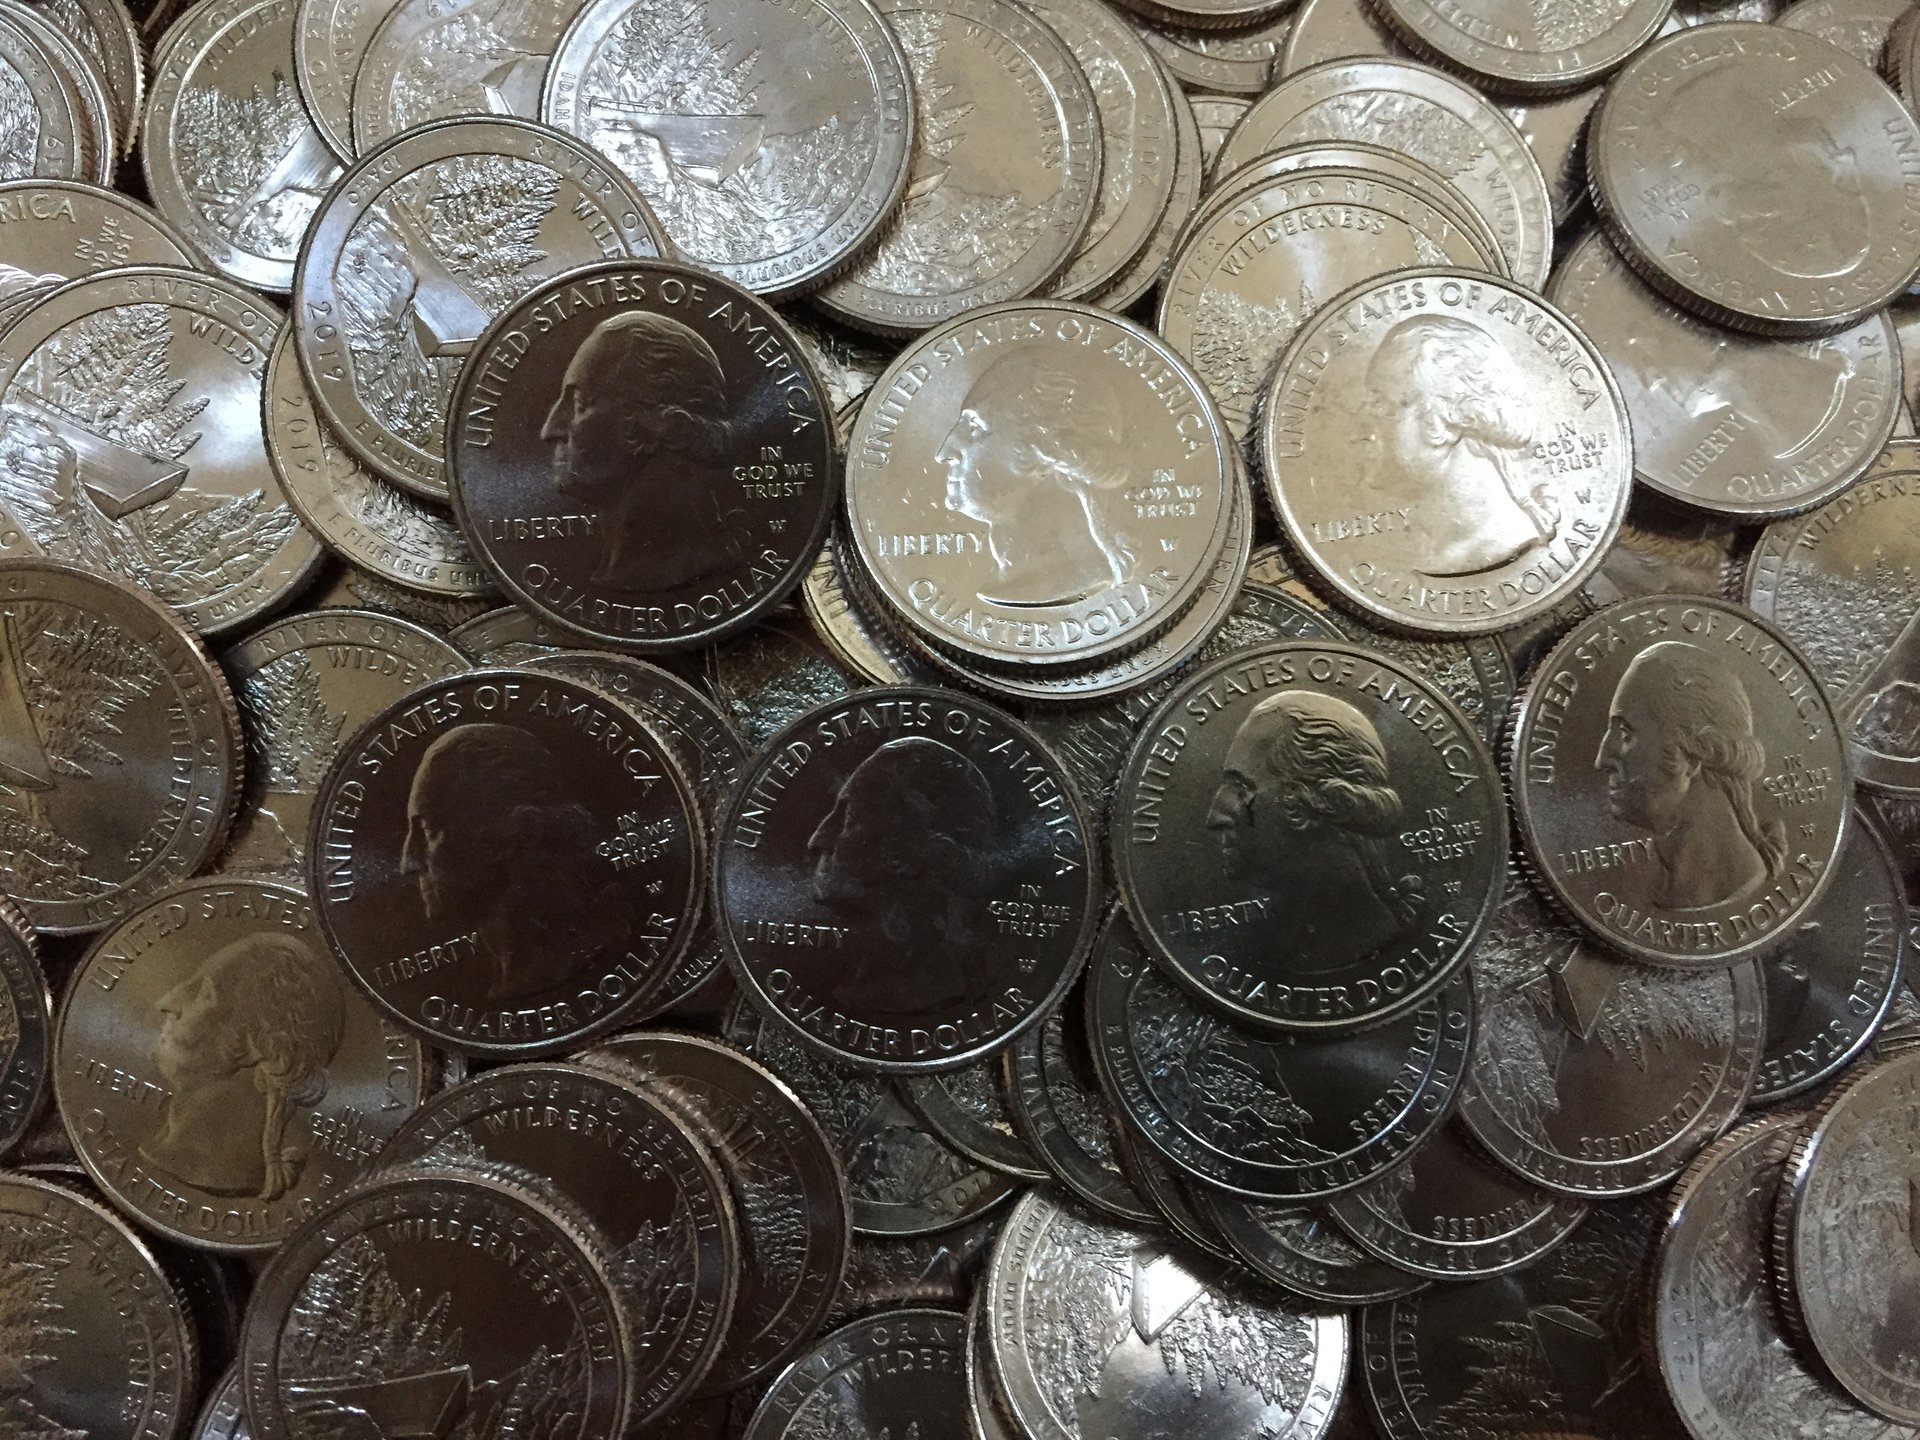 River of No Return West Point Quarters Found | Coin Talk